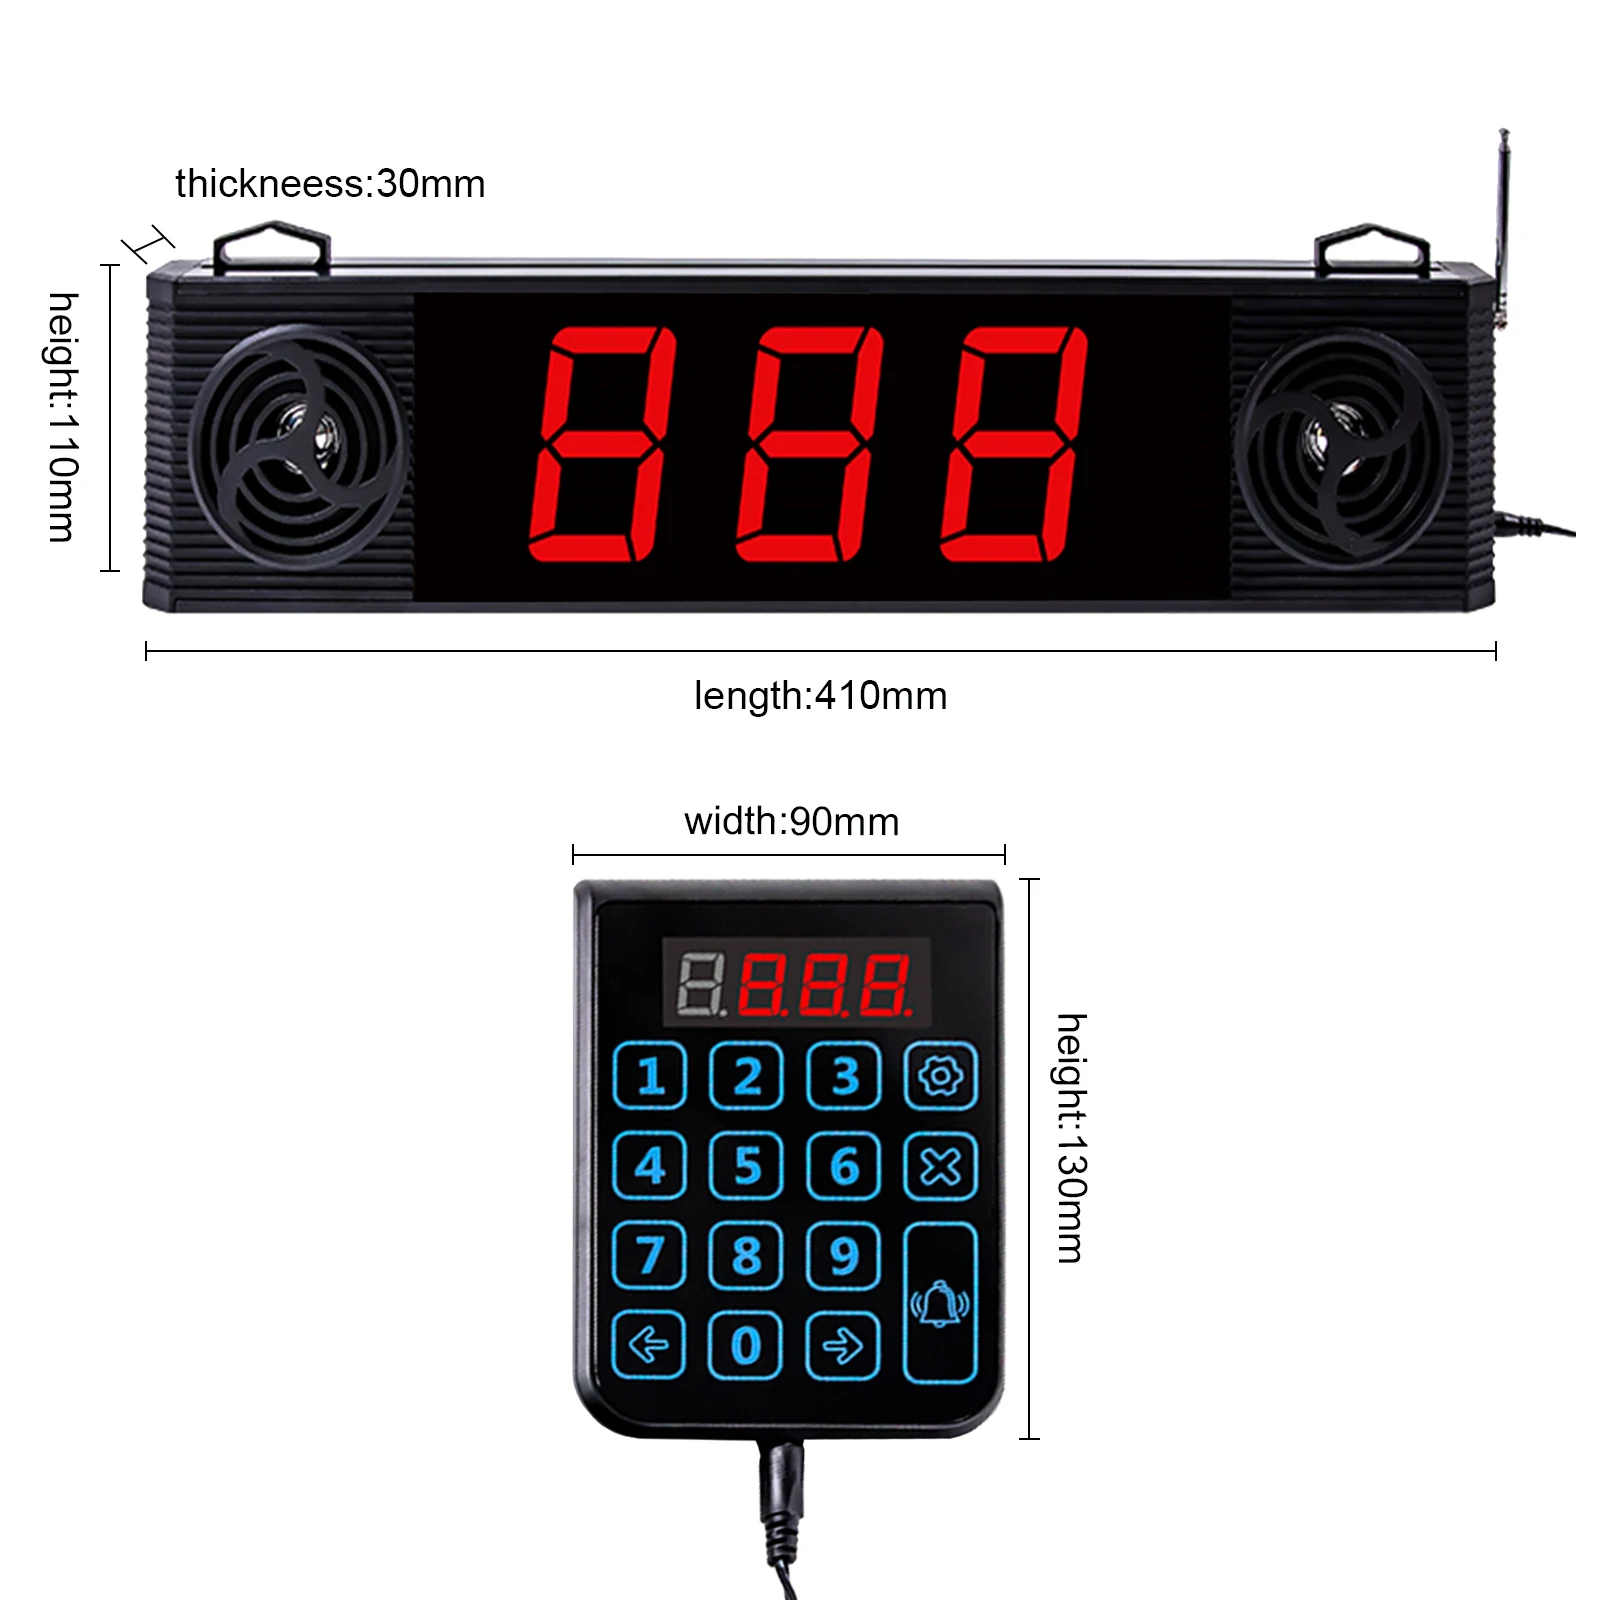 

Daytech CK03 1PC Display Receiver+1 Keypad Take A Number Calling System Wireless Queue Paging System for Restaurant Bank Hospita, Black